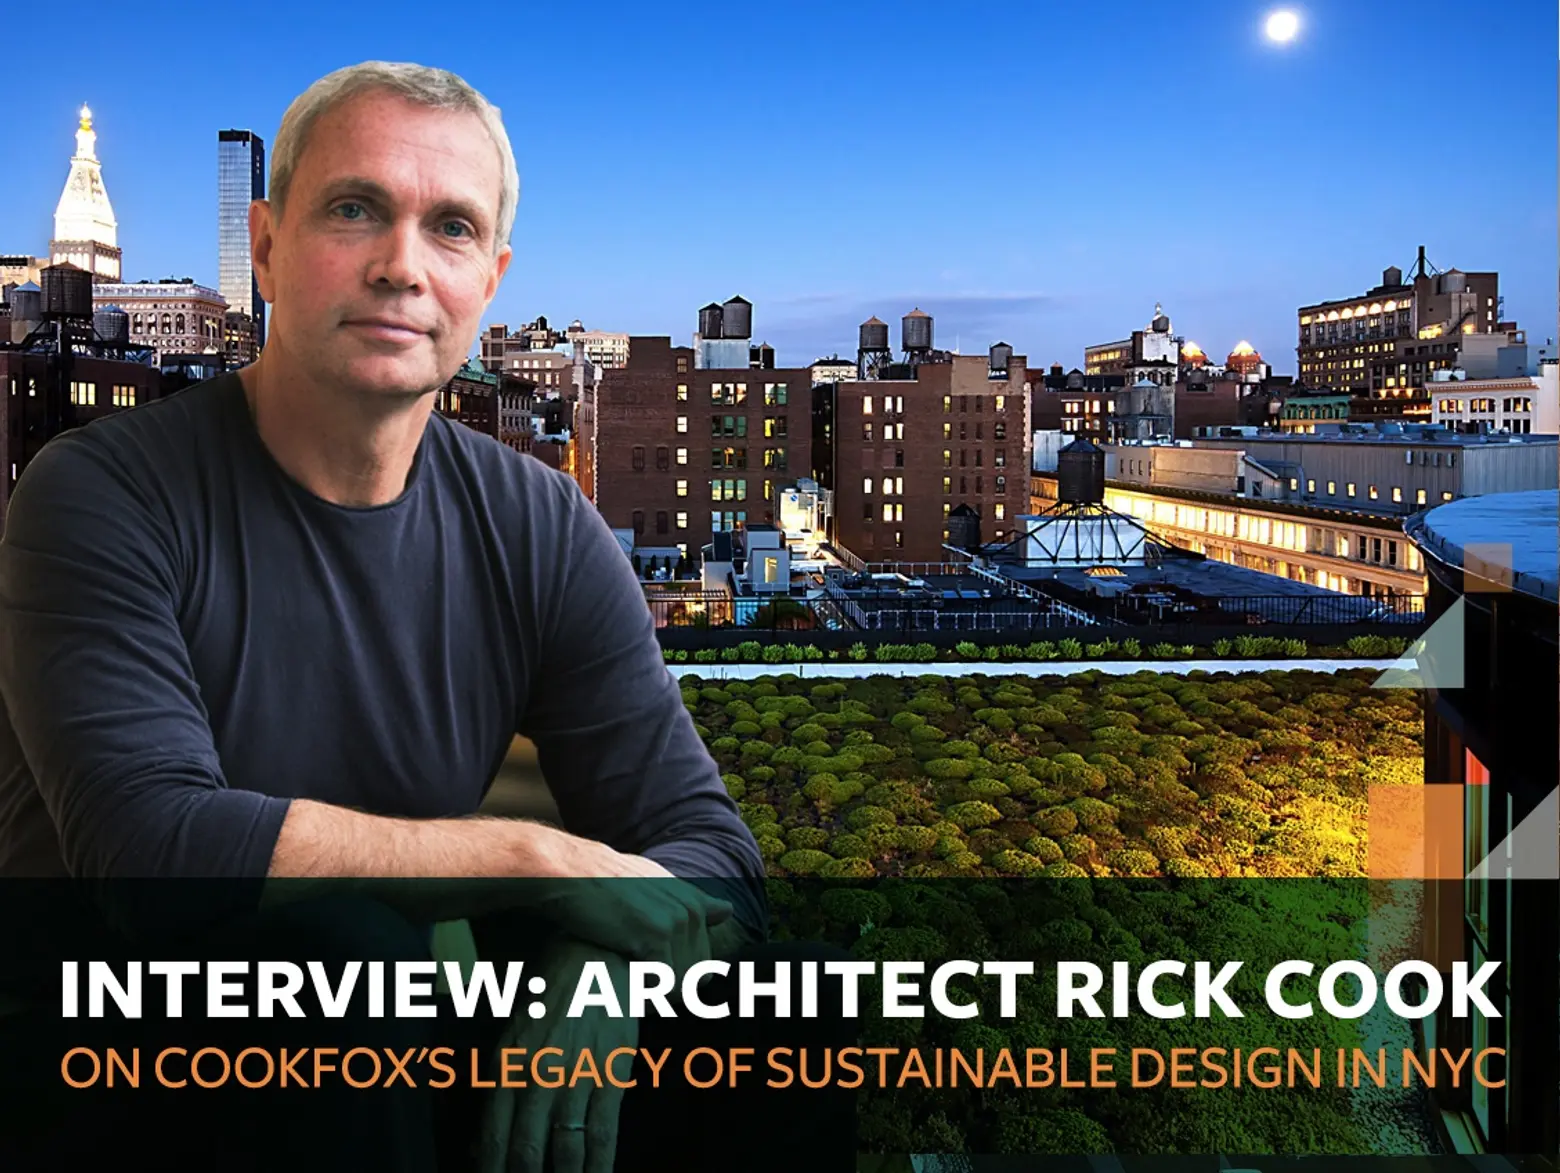 INTERVIEW: Architect Rick Cook on the legacy of COOKFOX’s sustainable design in NYC